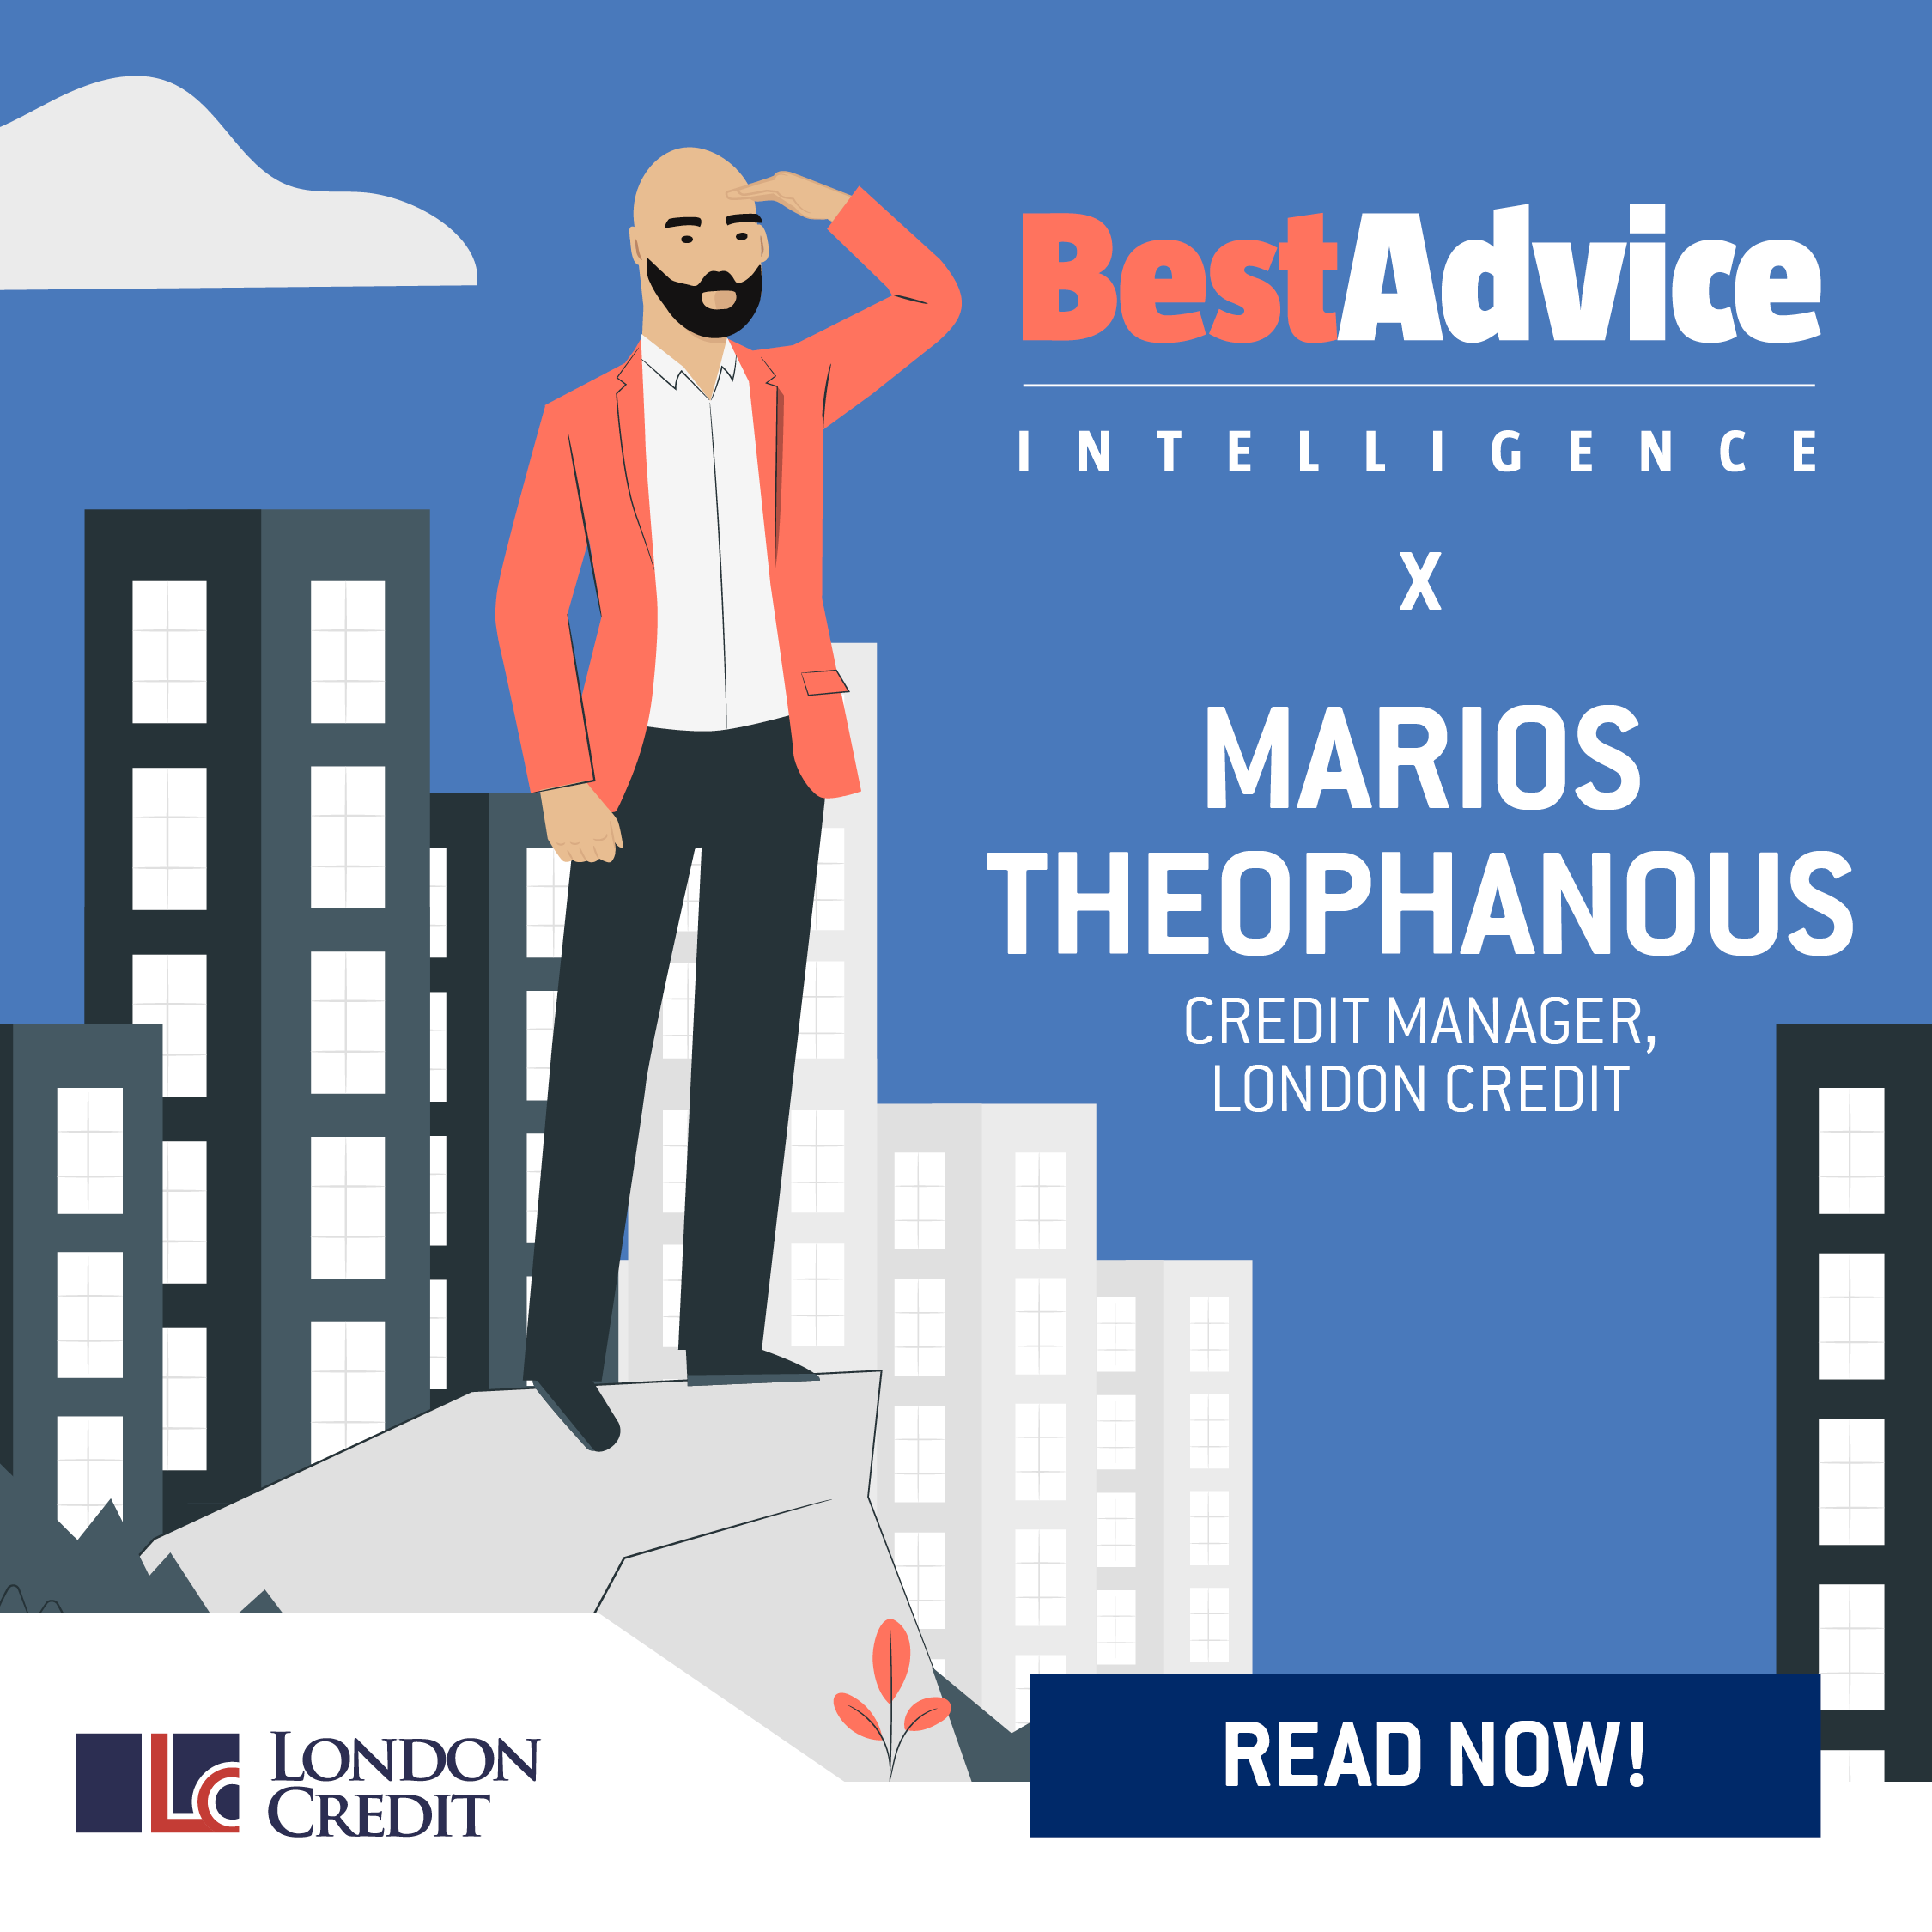 BestAdvice fires the questions at Marios Theophanous